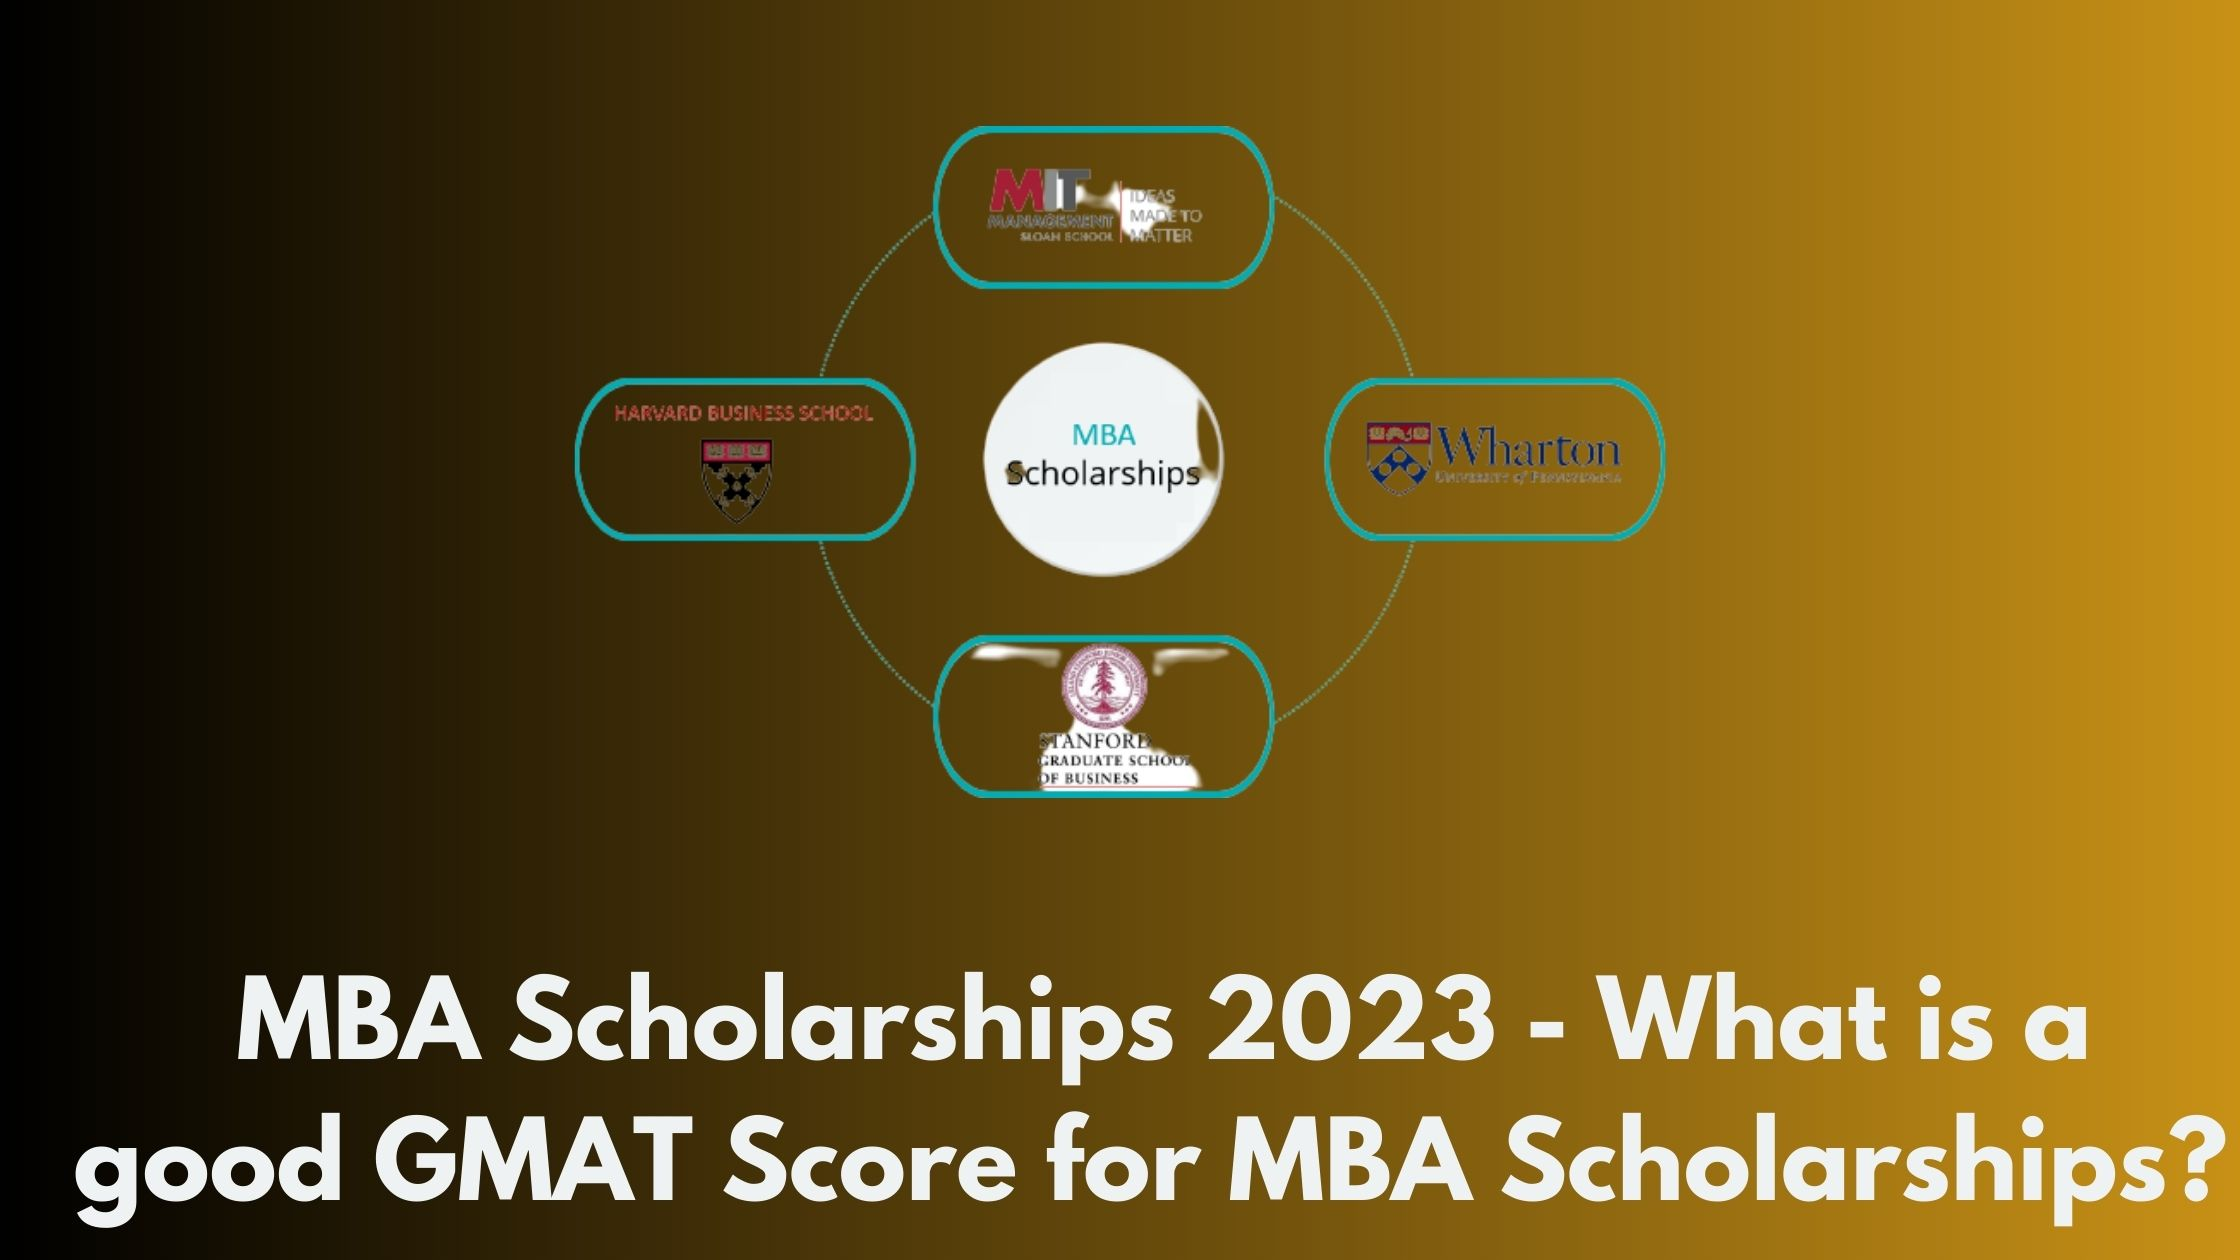 MBA Scholarships 2023 - What is a good GMAT Score for MBA Scholarships?